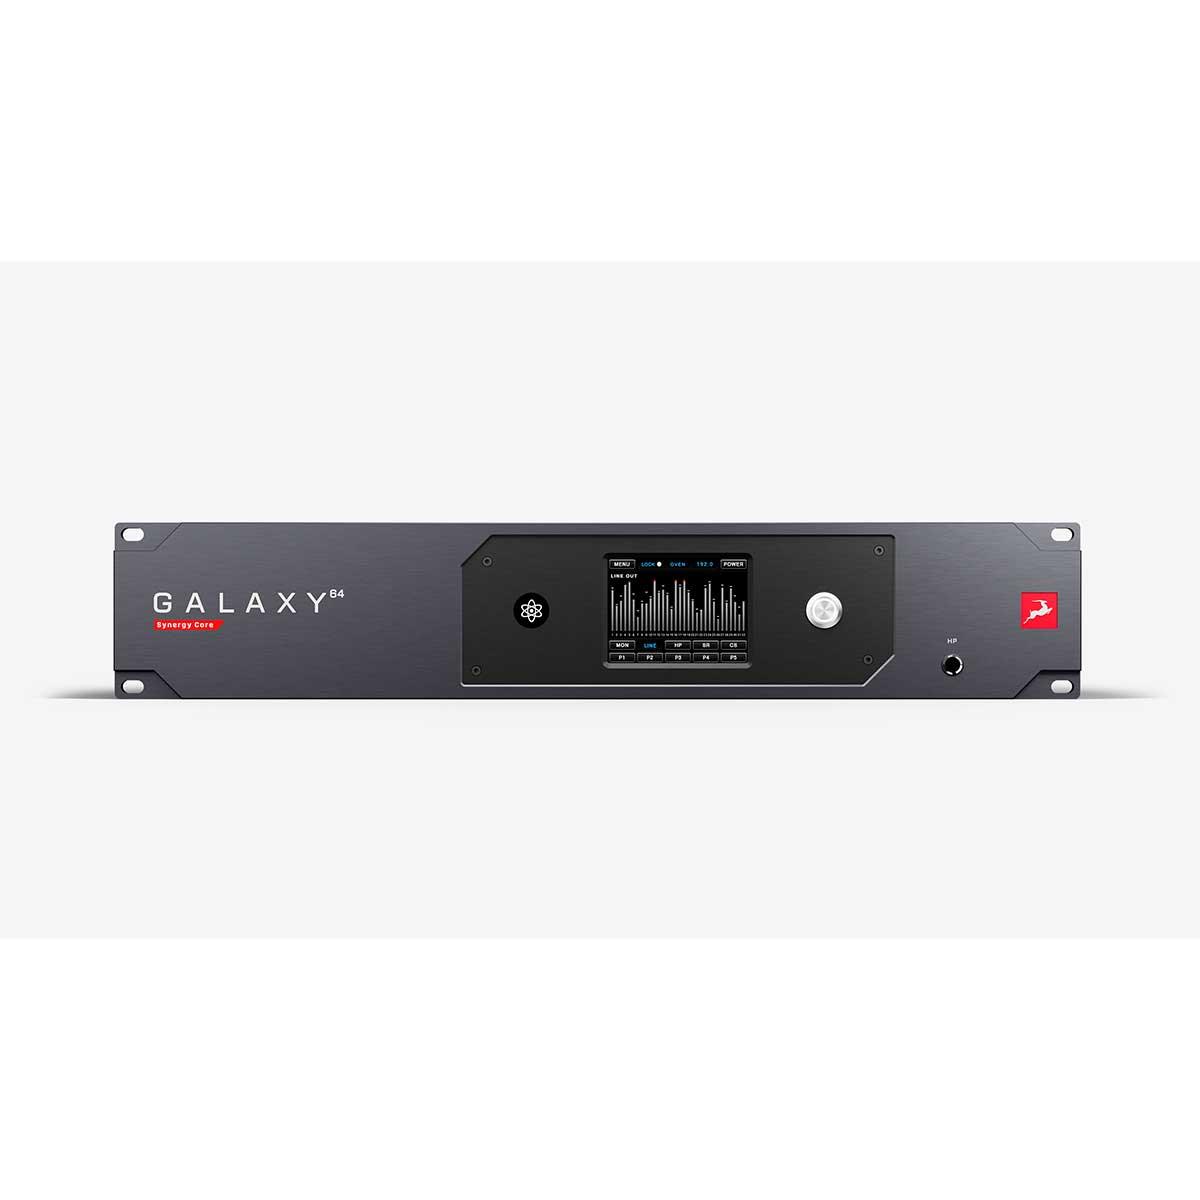 Antelope Galaxy 64 Synergy Core DANTE, HDX and Thunderbolt Interface with 64 Channel AD/DA